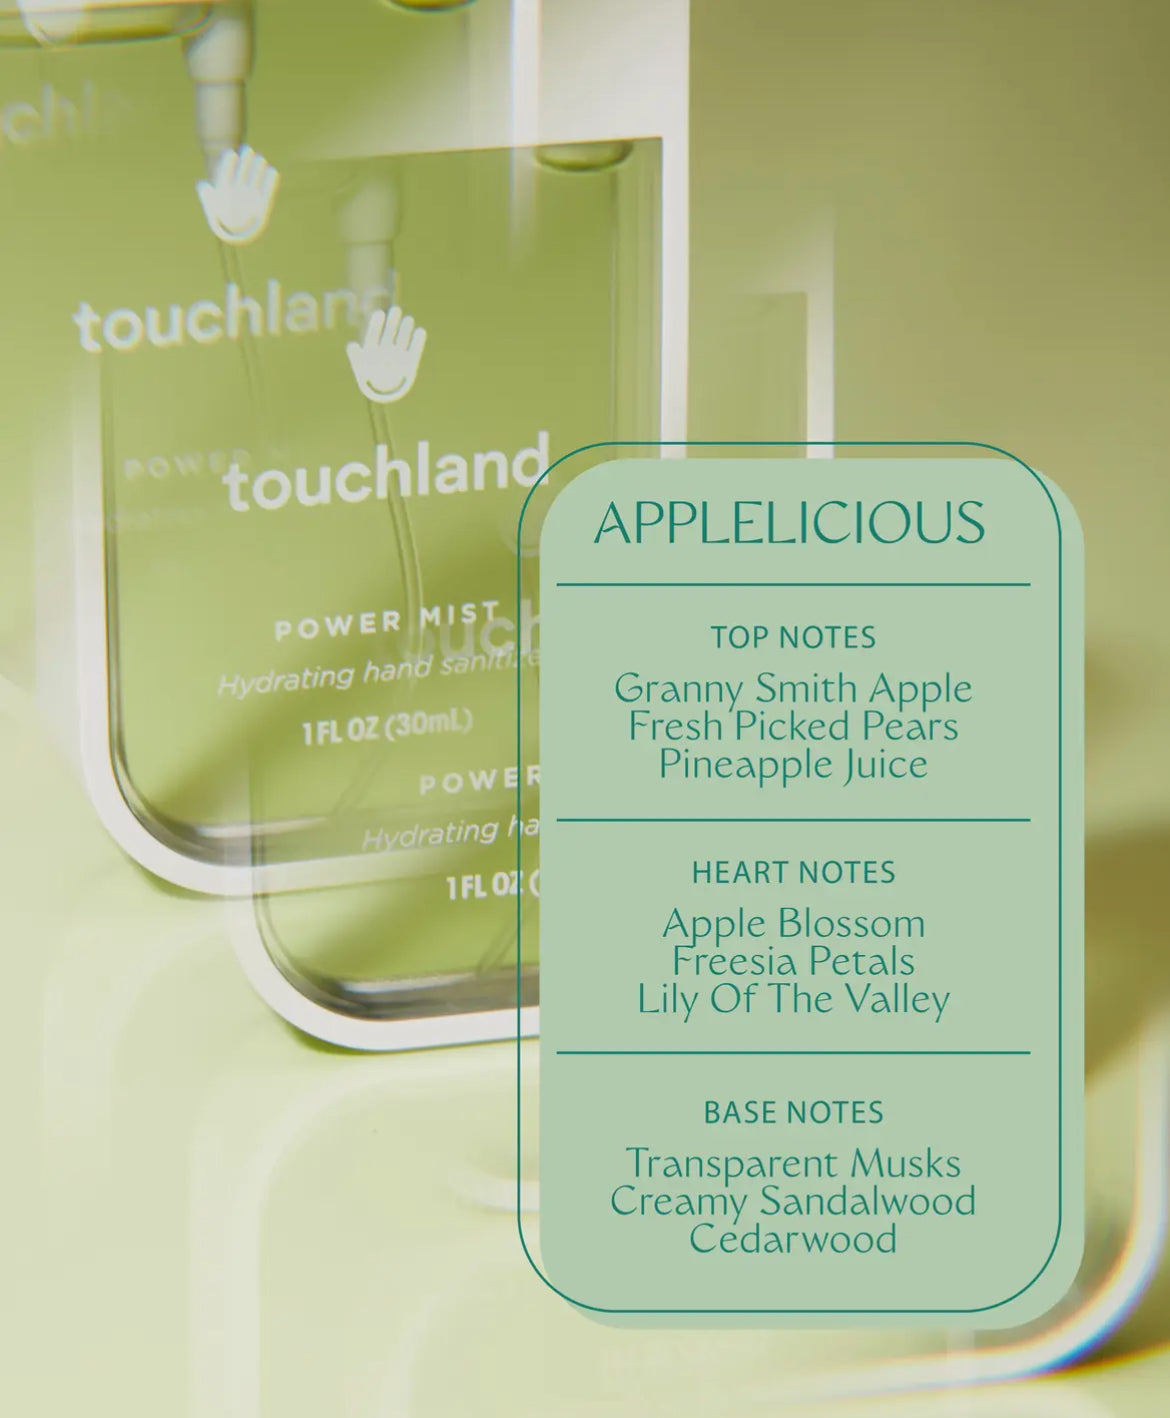 TOUCHLAND: APPLELICIOUS